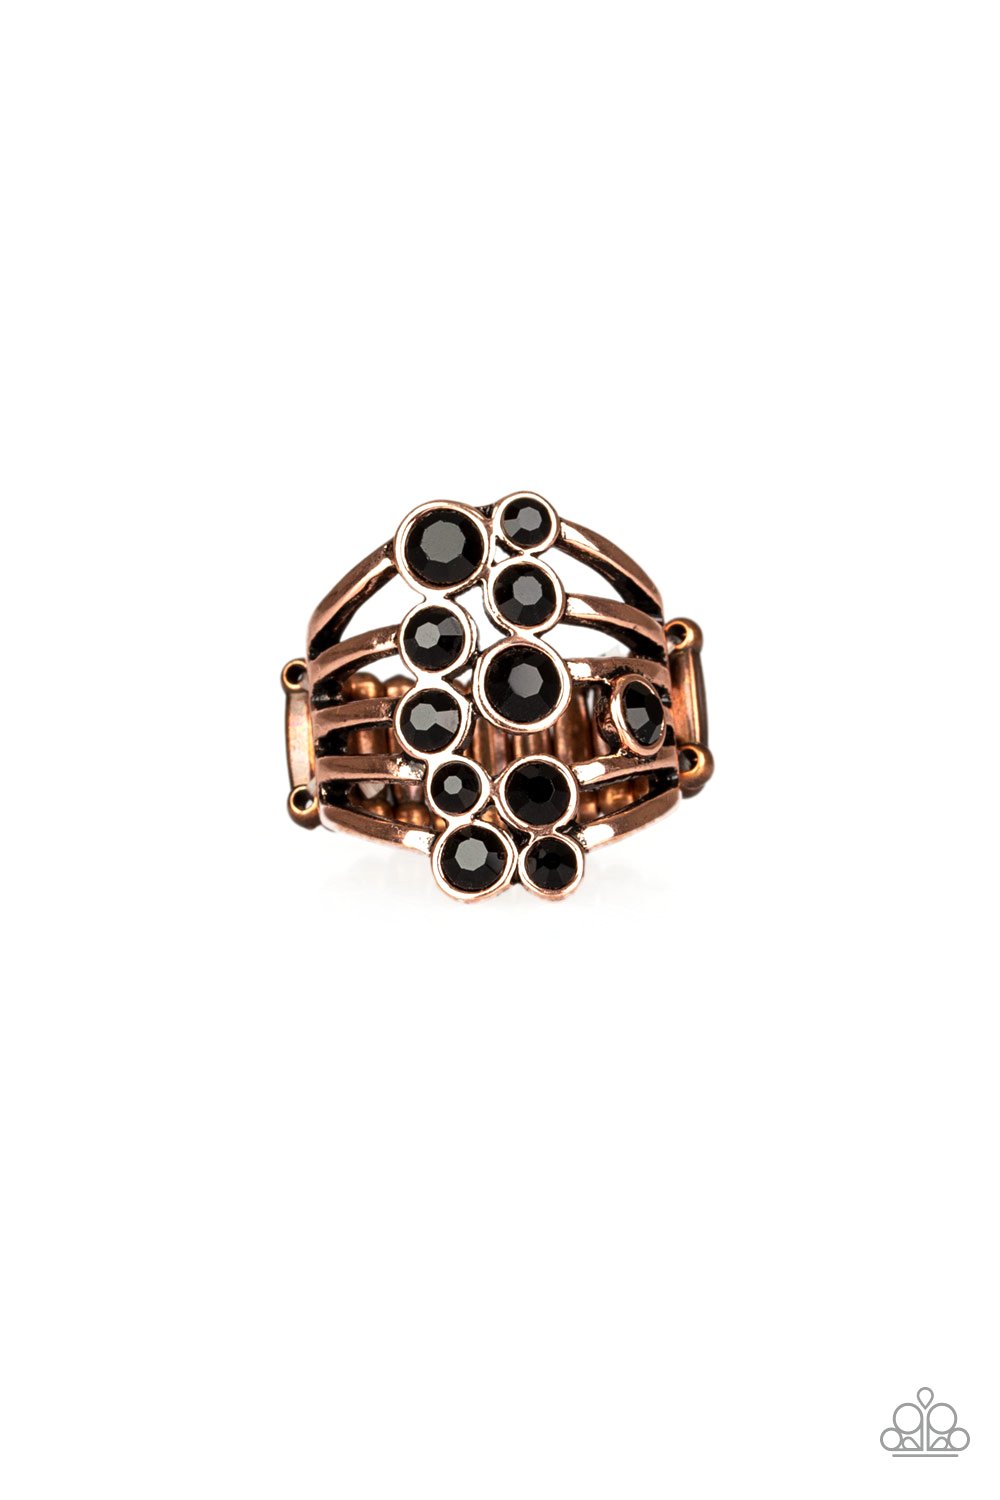 Meet in the Middle - Copper Ring